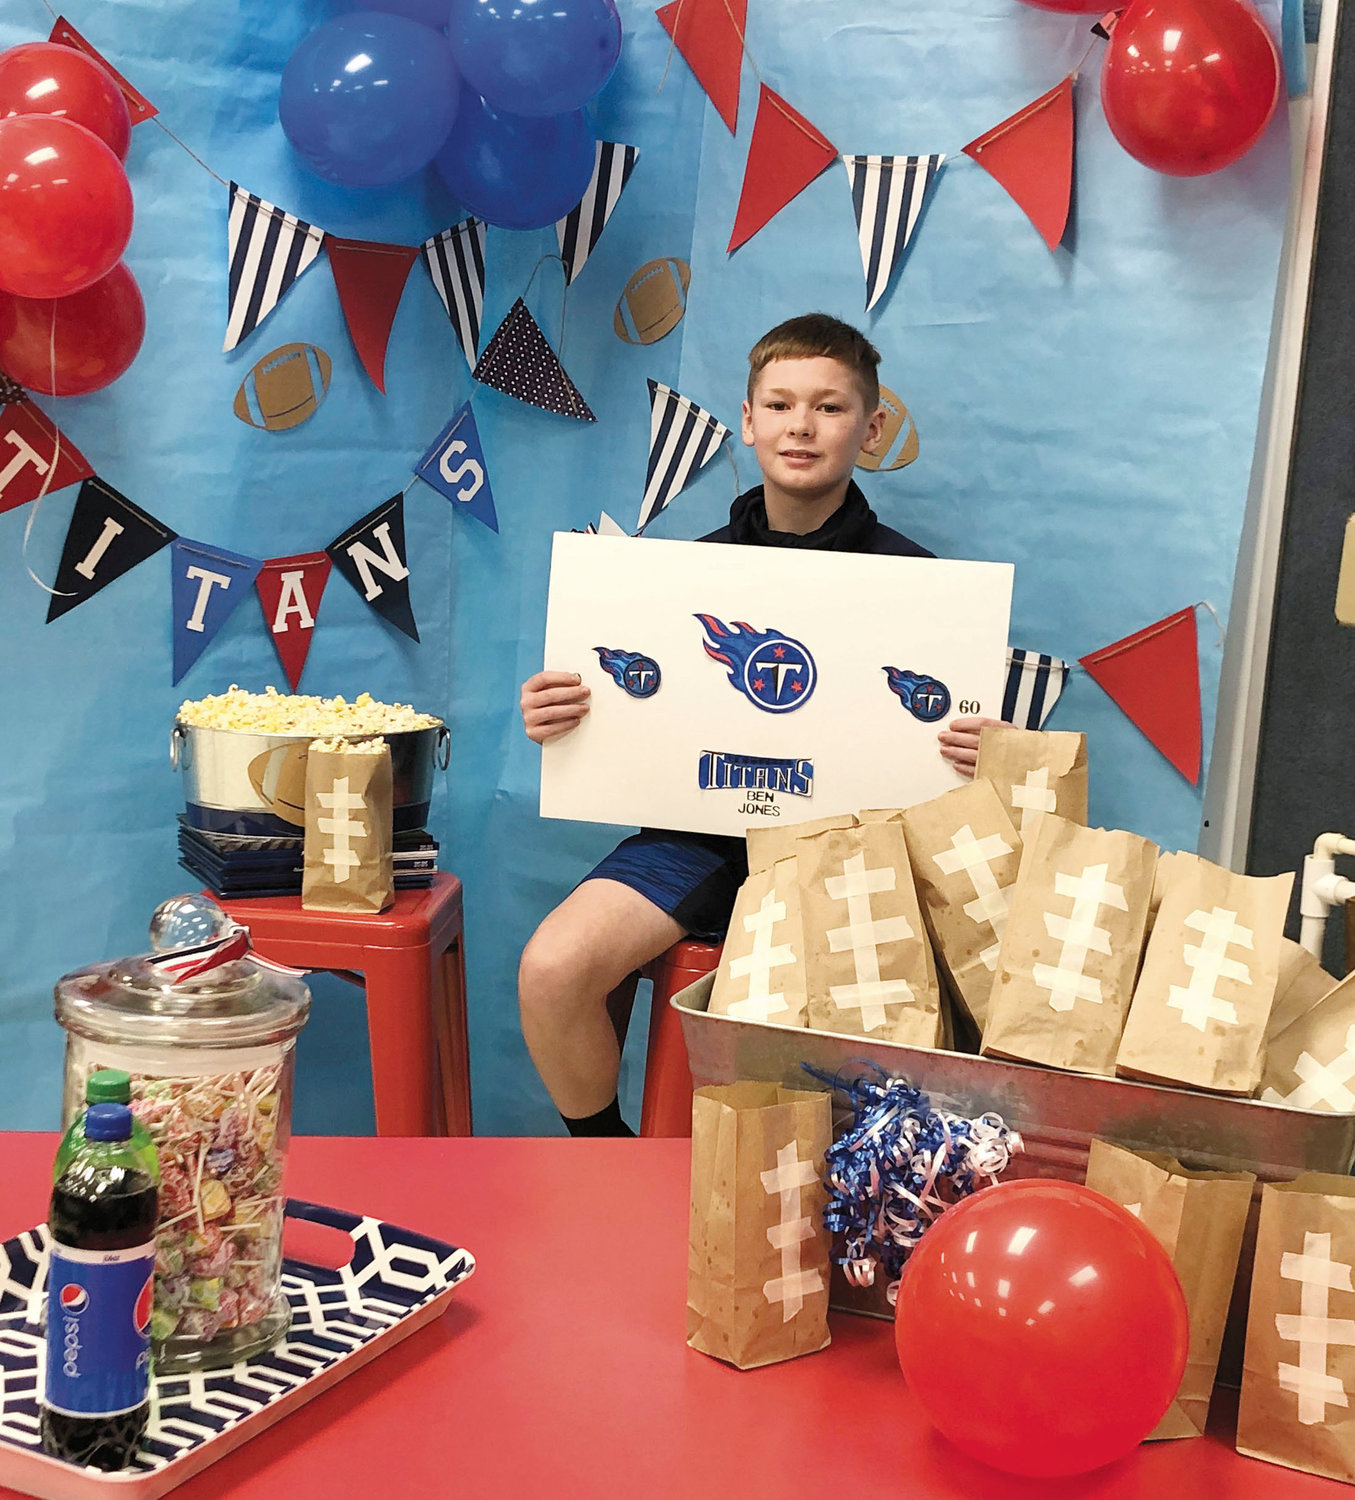 Bryson Burchett, a student at Northfield Elementary, hosted Titans center Ben Jones and introduced him to his classmates via a virtual event.